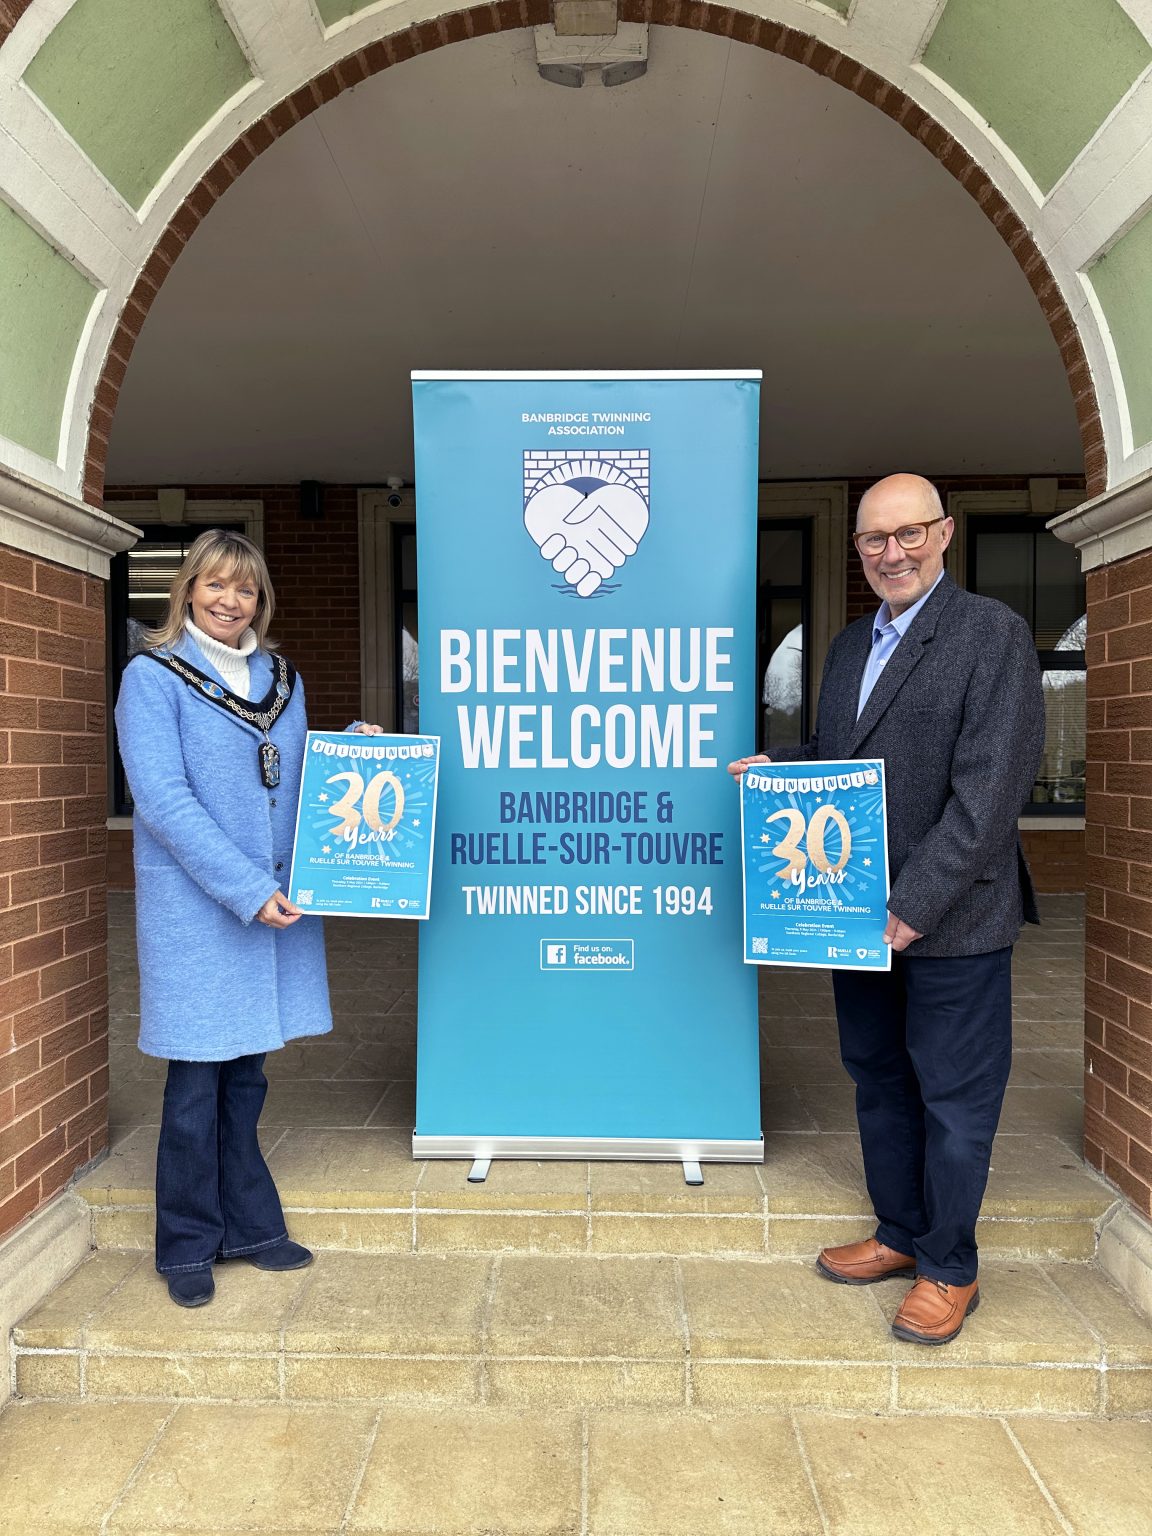 Lord Mayor of Armagh City, Banbridge and Craigavon, Alderman Margaret Tinsley is joined by Gilbert Lee, Chair of Banbridge Twinning Association to offer a warm welcome to our friends from Ruelle-sur-Touvre.